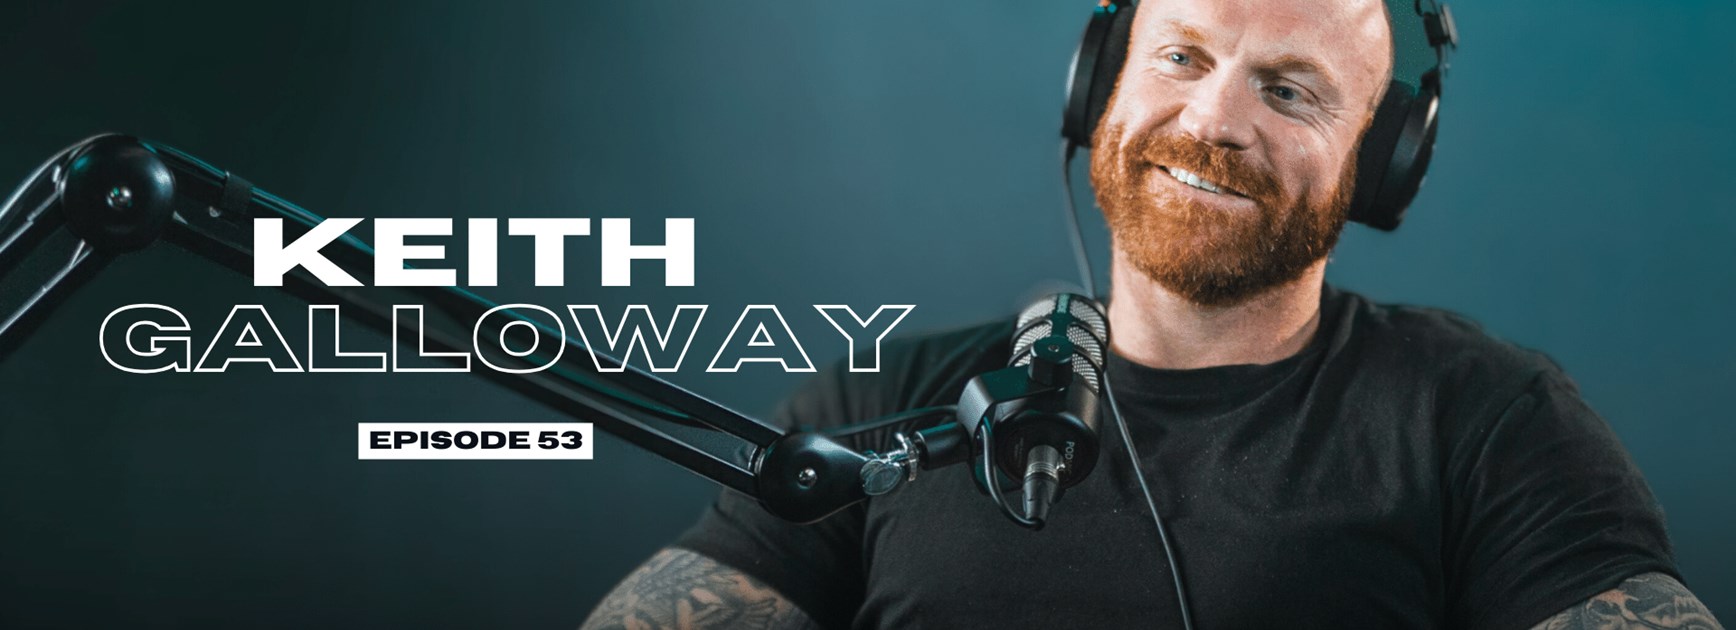 Podcast: BTR Episode 53 with Keith Galloway